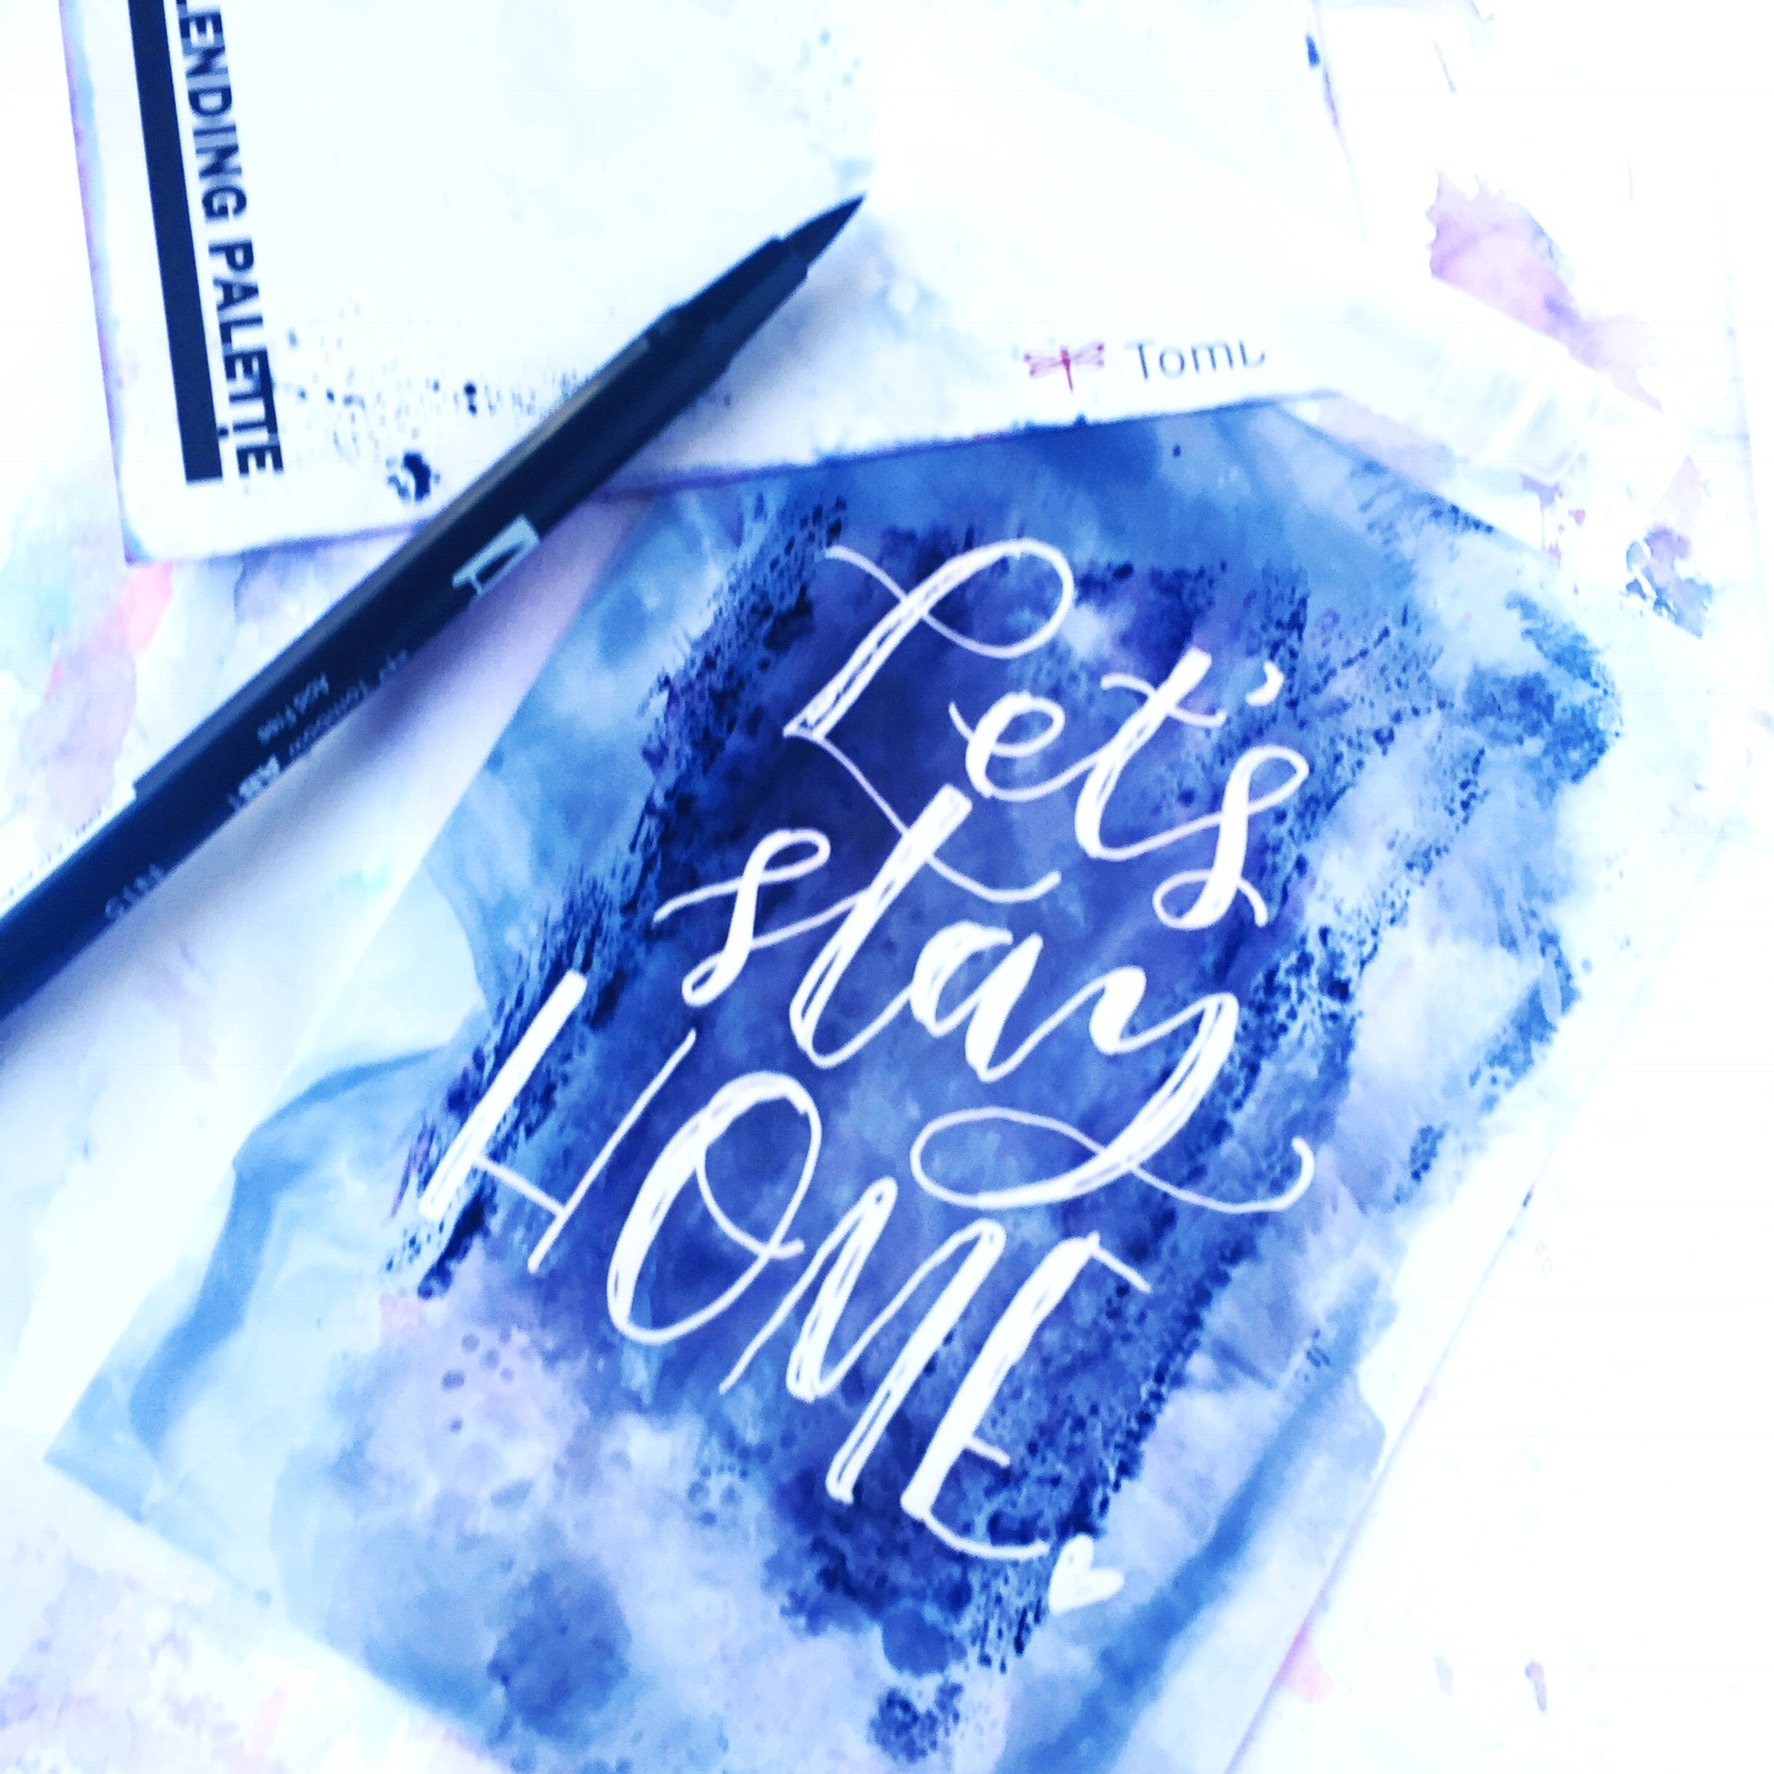 Learn how to use Tombow USA products with ink jet photo paper to create some amazing Watercolor resist designs that are perfectly frame worthy! Lauren of @renmadecalligraphy shows you tips and tricks in this step by step tutorial!